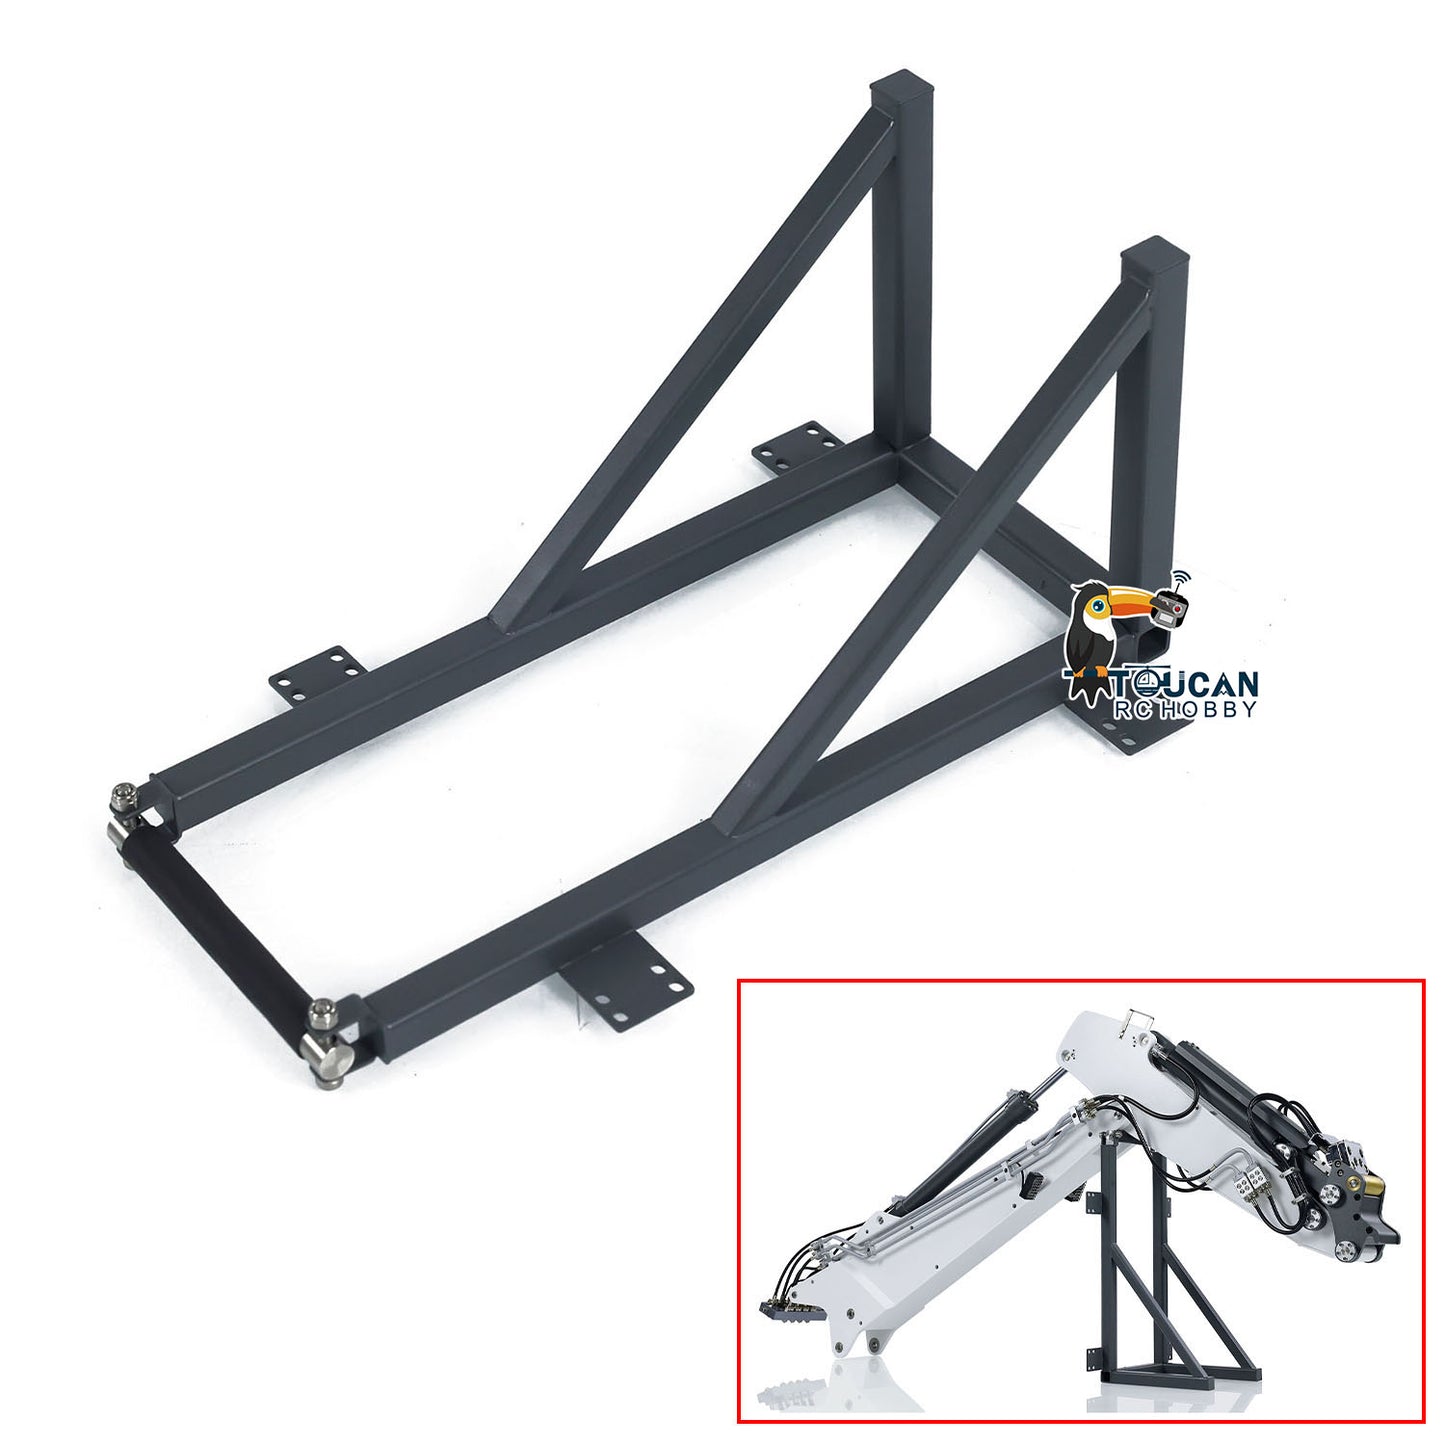 Metal Rack for K970-301 CUT 1/14 3 Arms RC Hydraulic Equipment Remote Controlled Excavator Diggers Simulation Model Parts